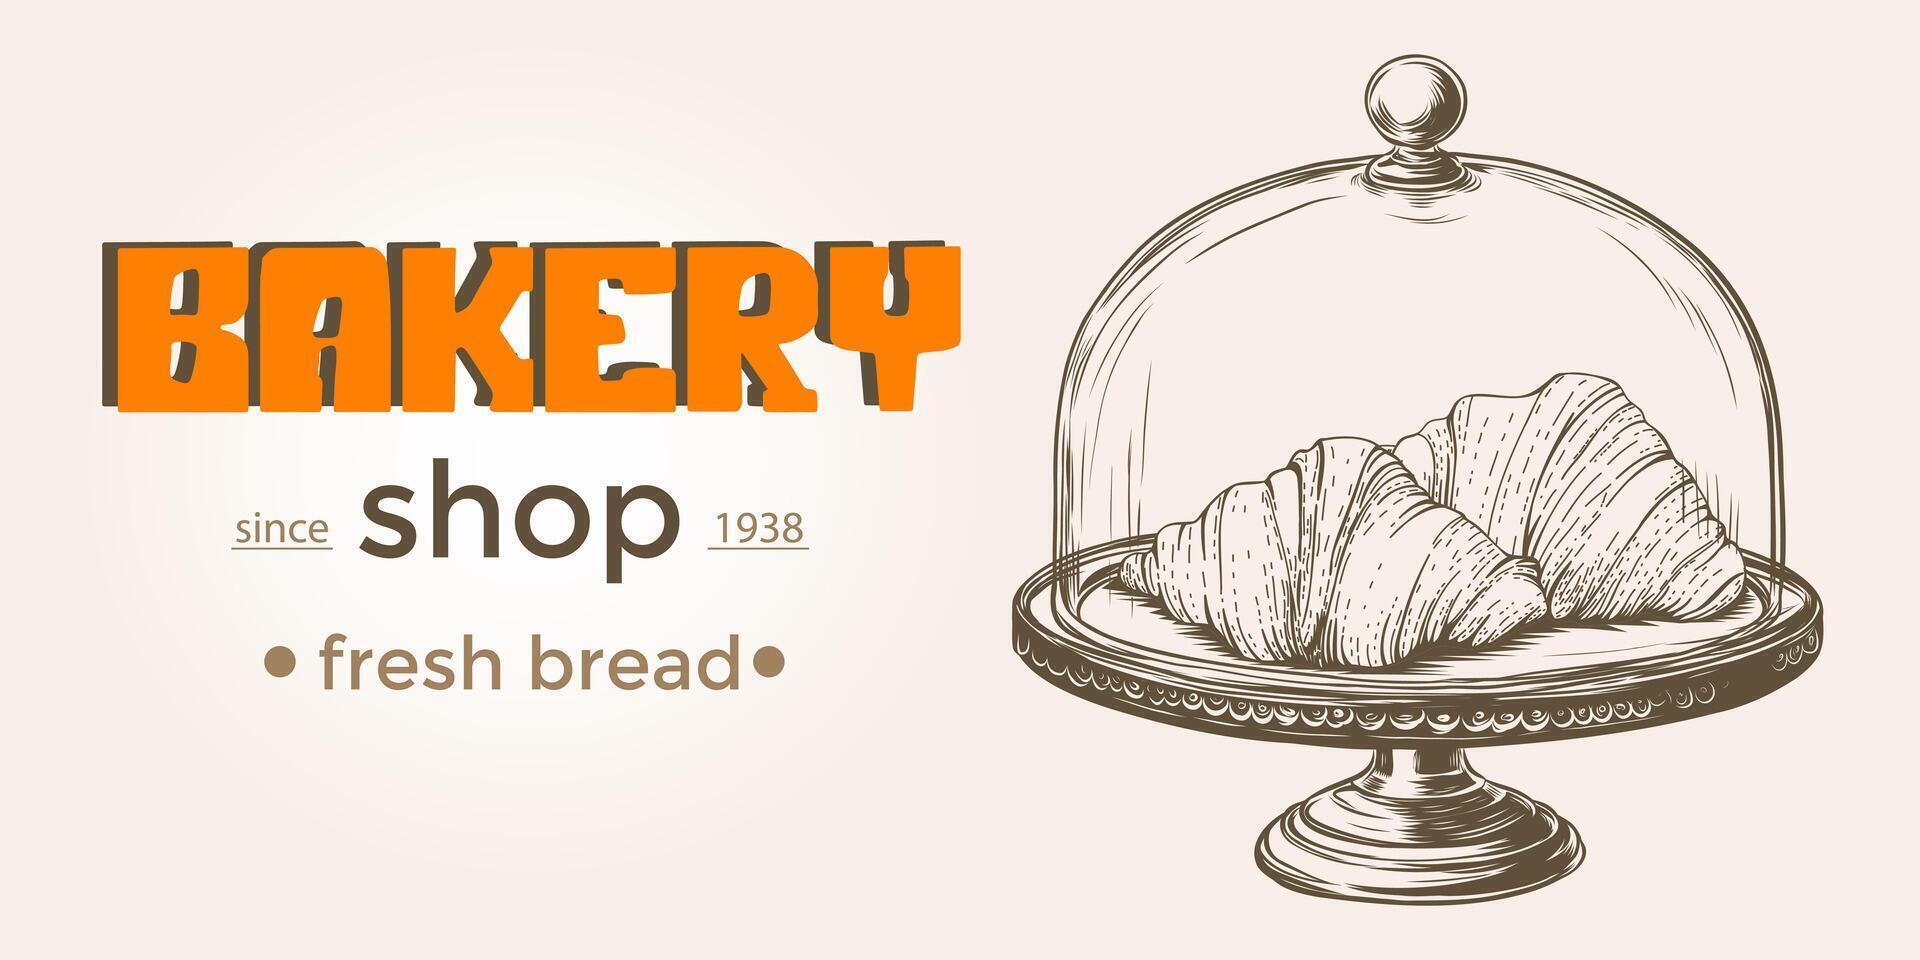 Vintage bakery banners with sketched croissant under glass lid. Template for bakery shop card, menu, package, food bun for breakfast, fresh bread. Linear graphic. vector